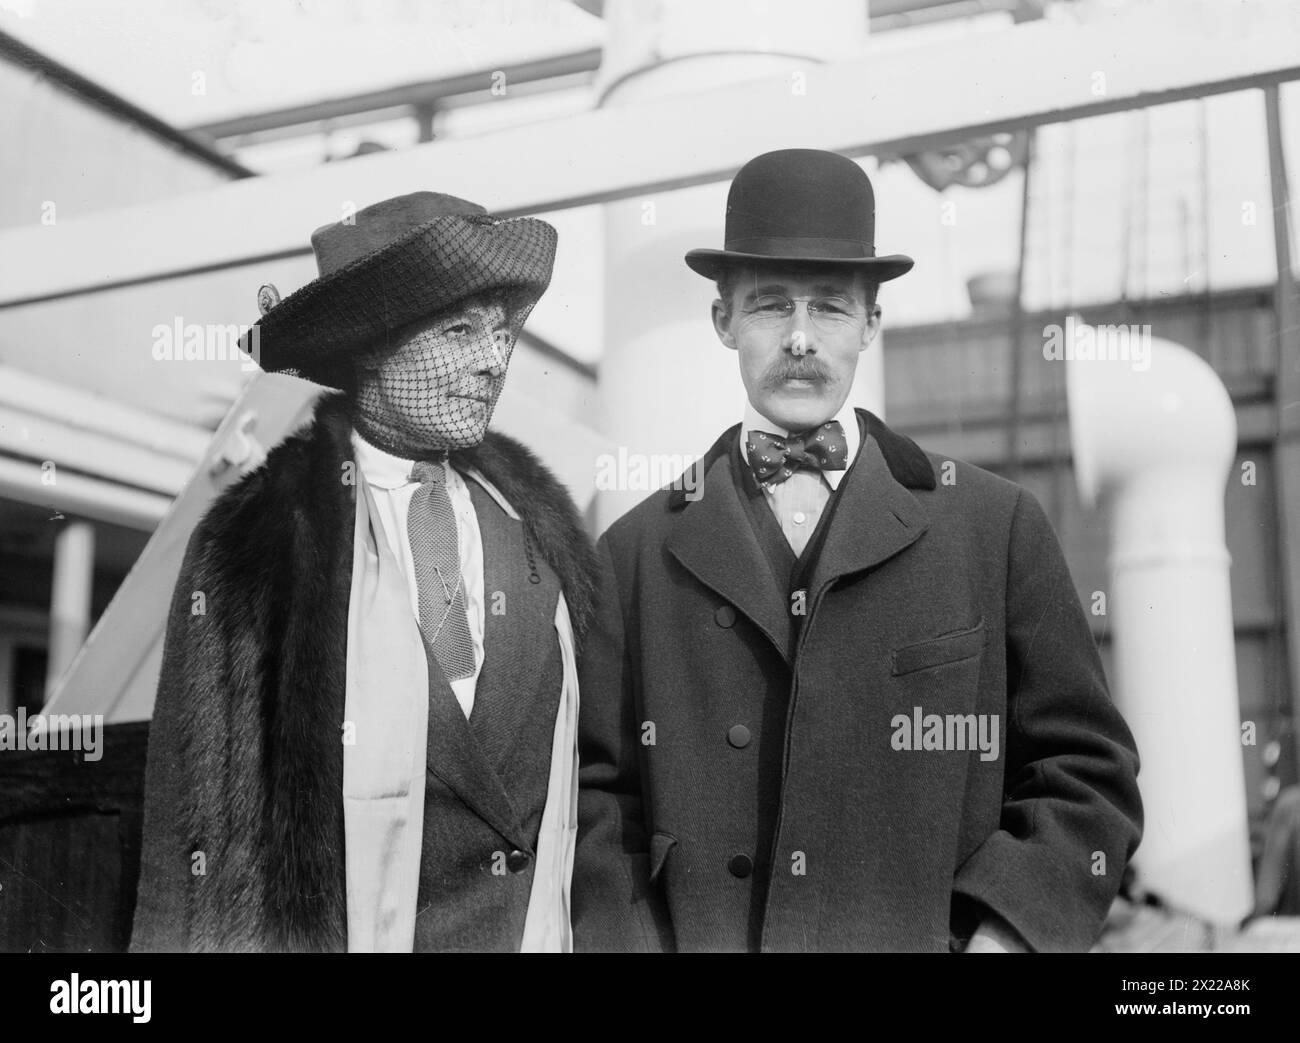 Lady Alan Johnstone, Amos Pinchot, between c1910 and c1915. Shows Lady Alan Johnstone (Antoinette Pinchot) with her brother, Amos Pinchot (1872-1944). Stock Photo